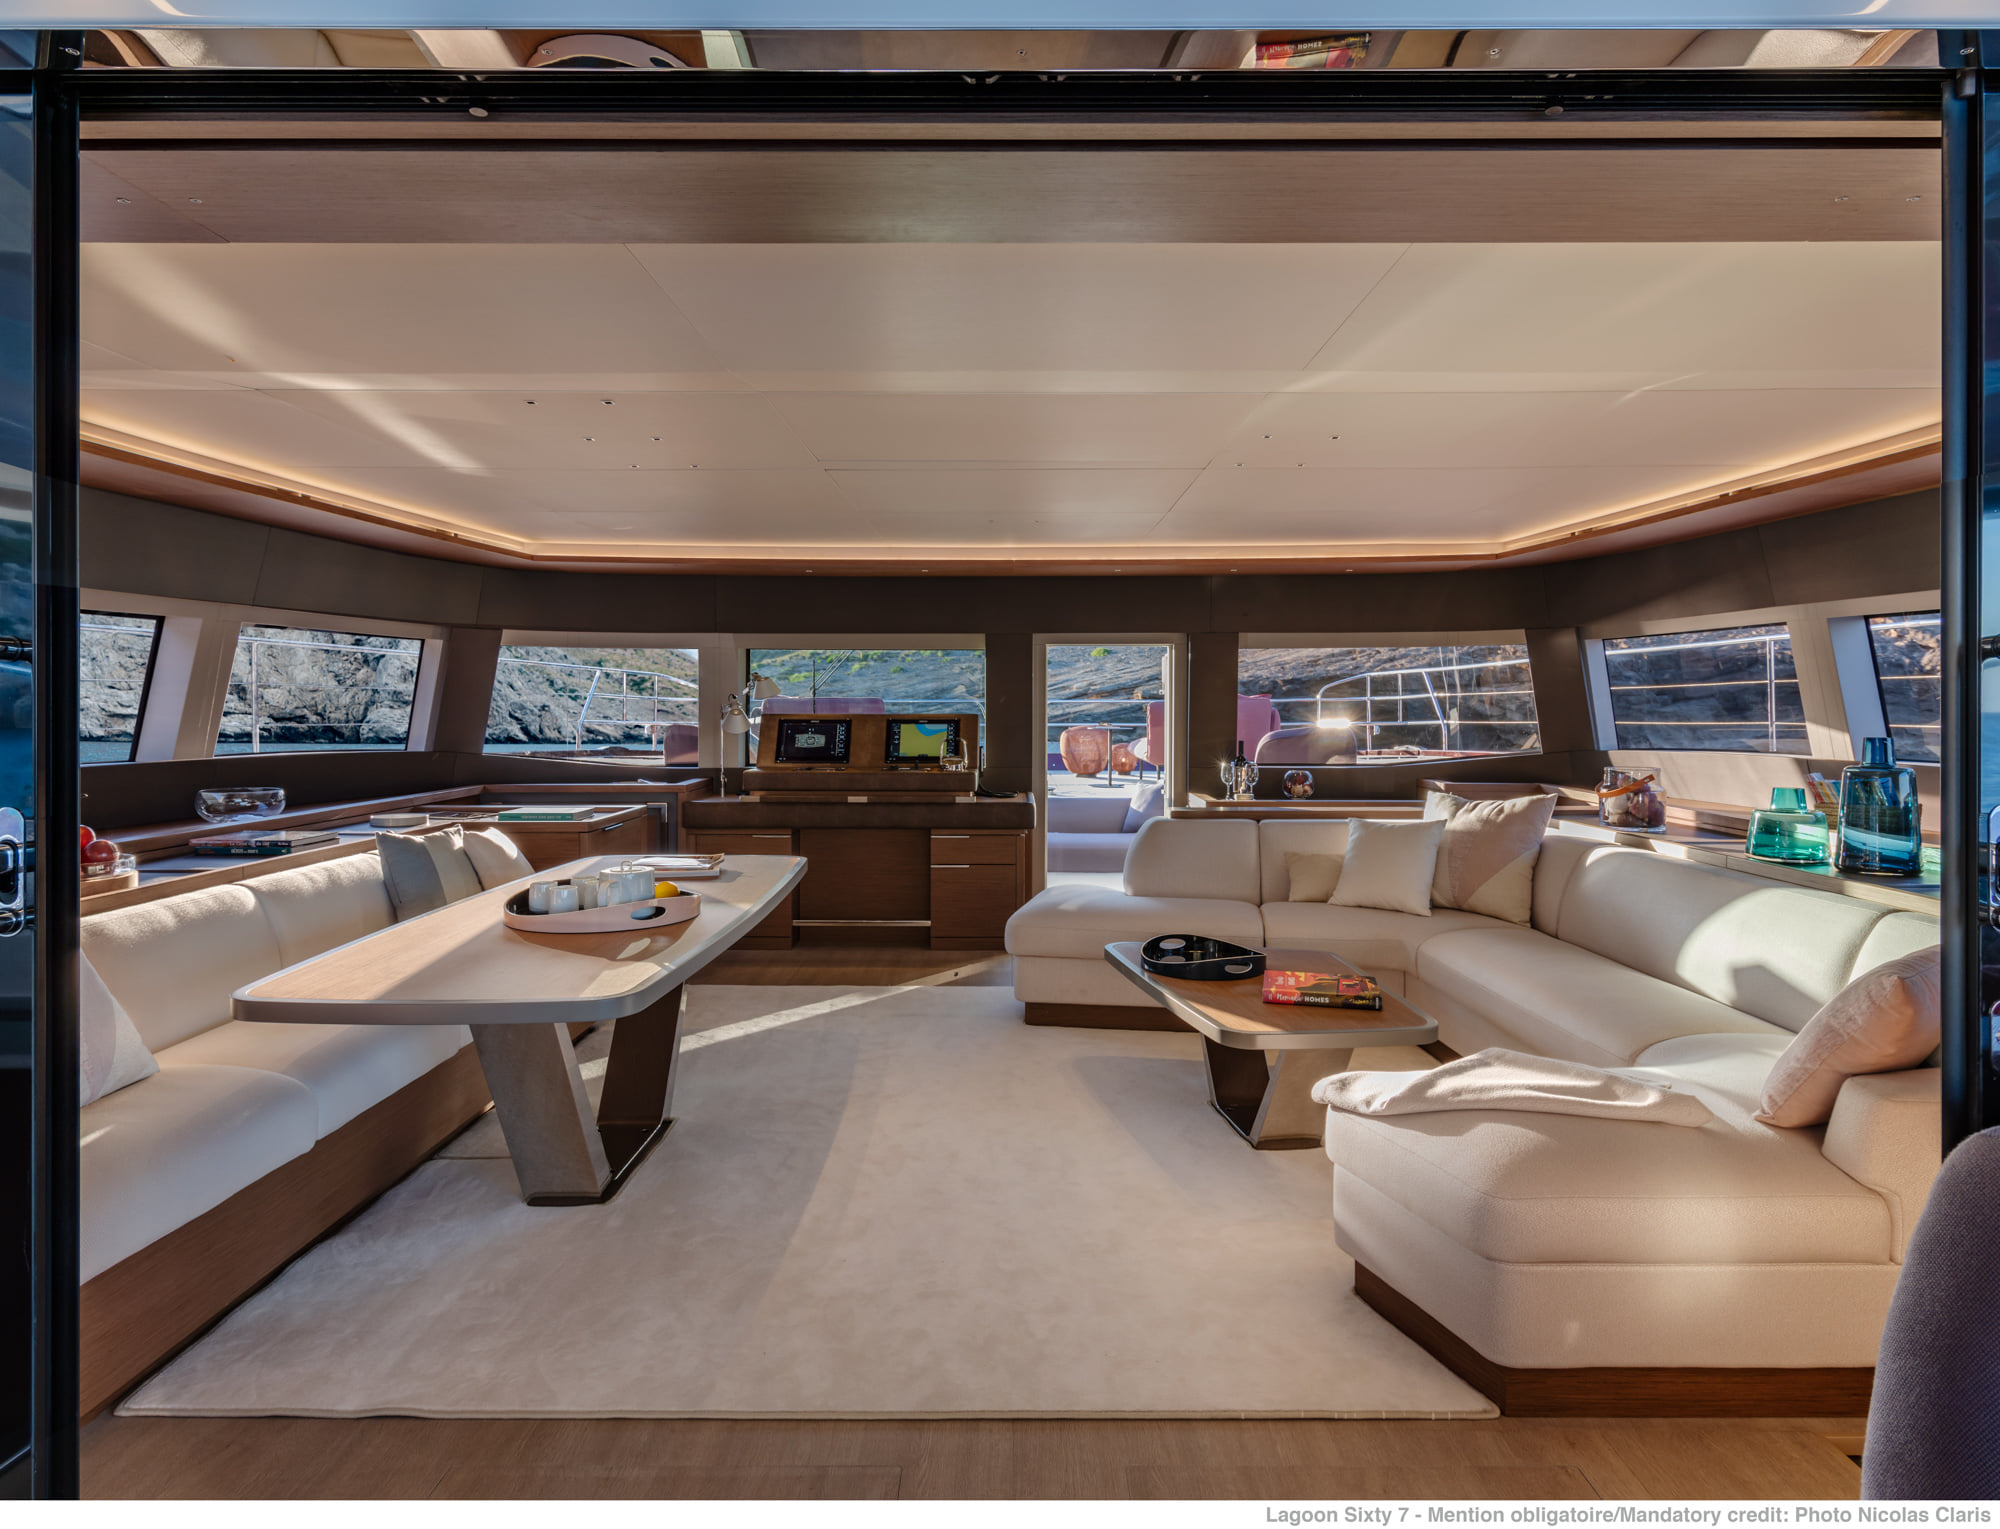 Lagoon SIXTY 7 Smooth flow between interior and exterior